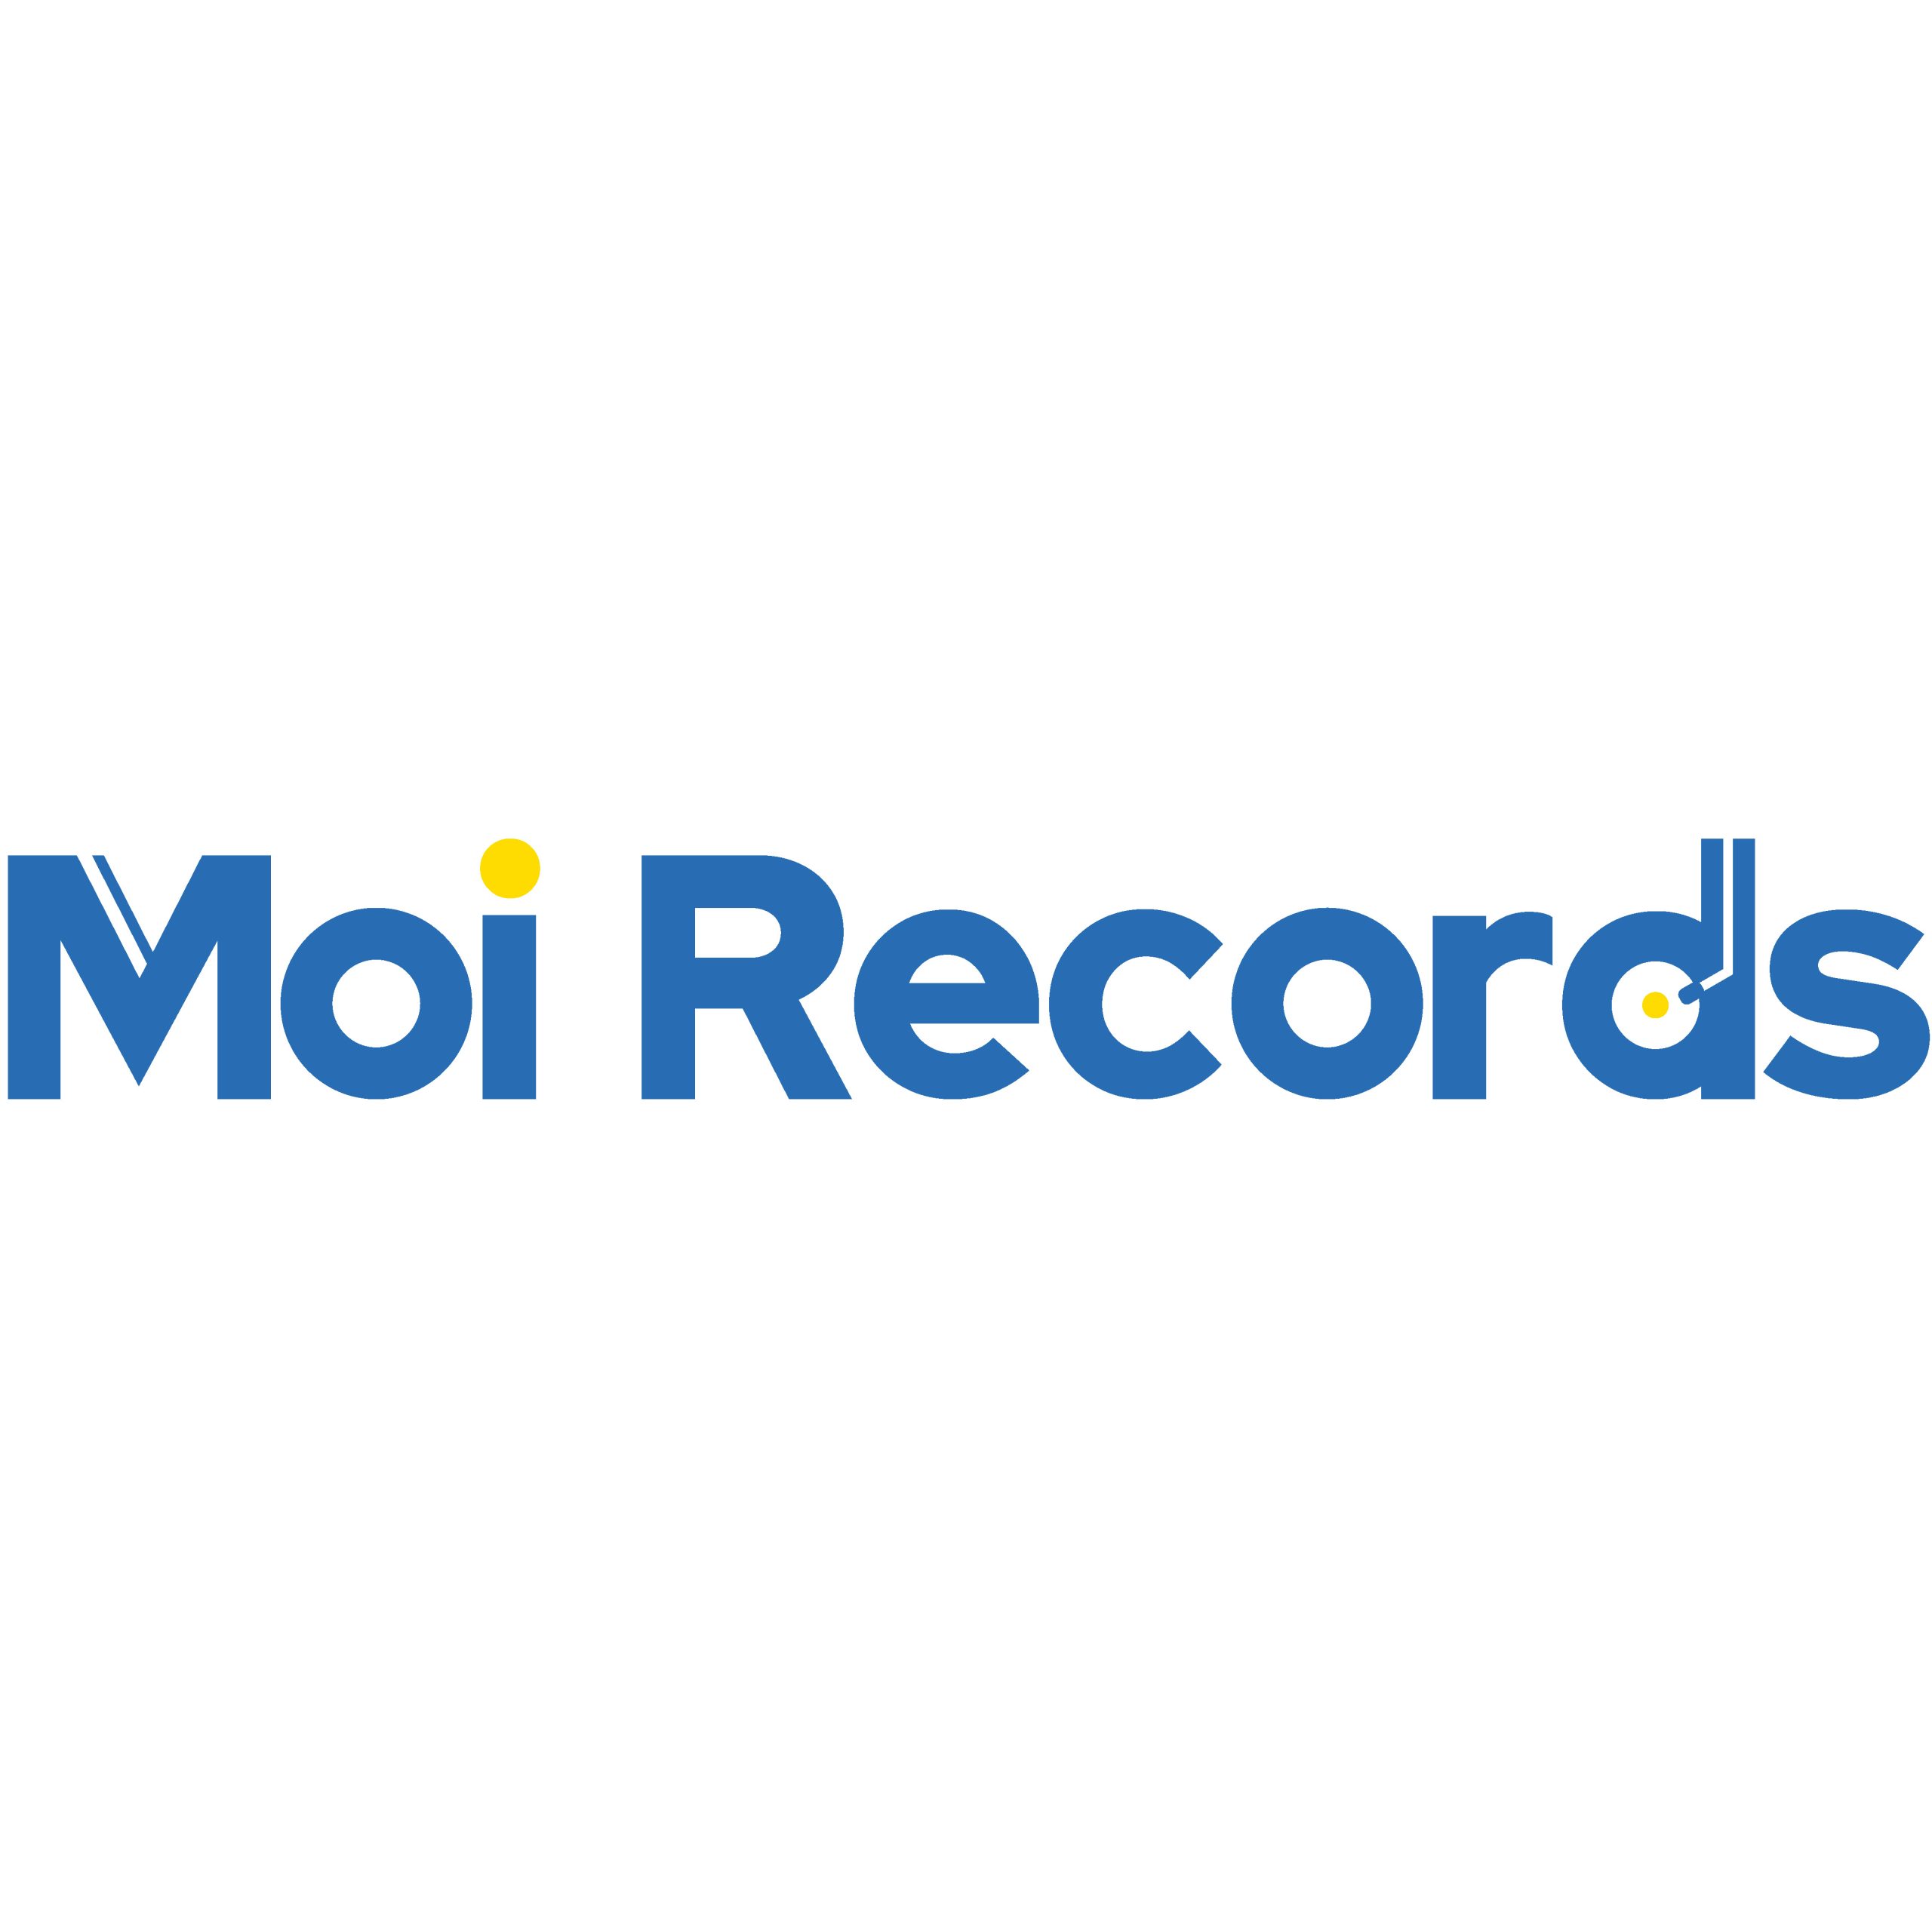 Moi Records が始動